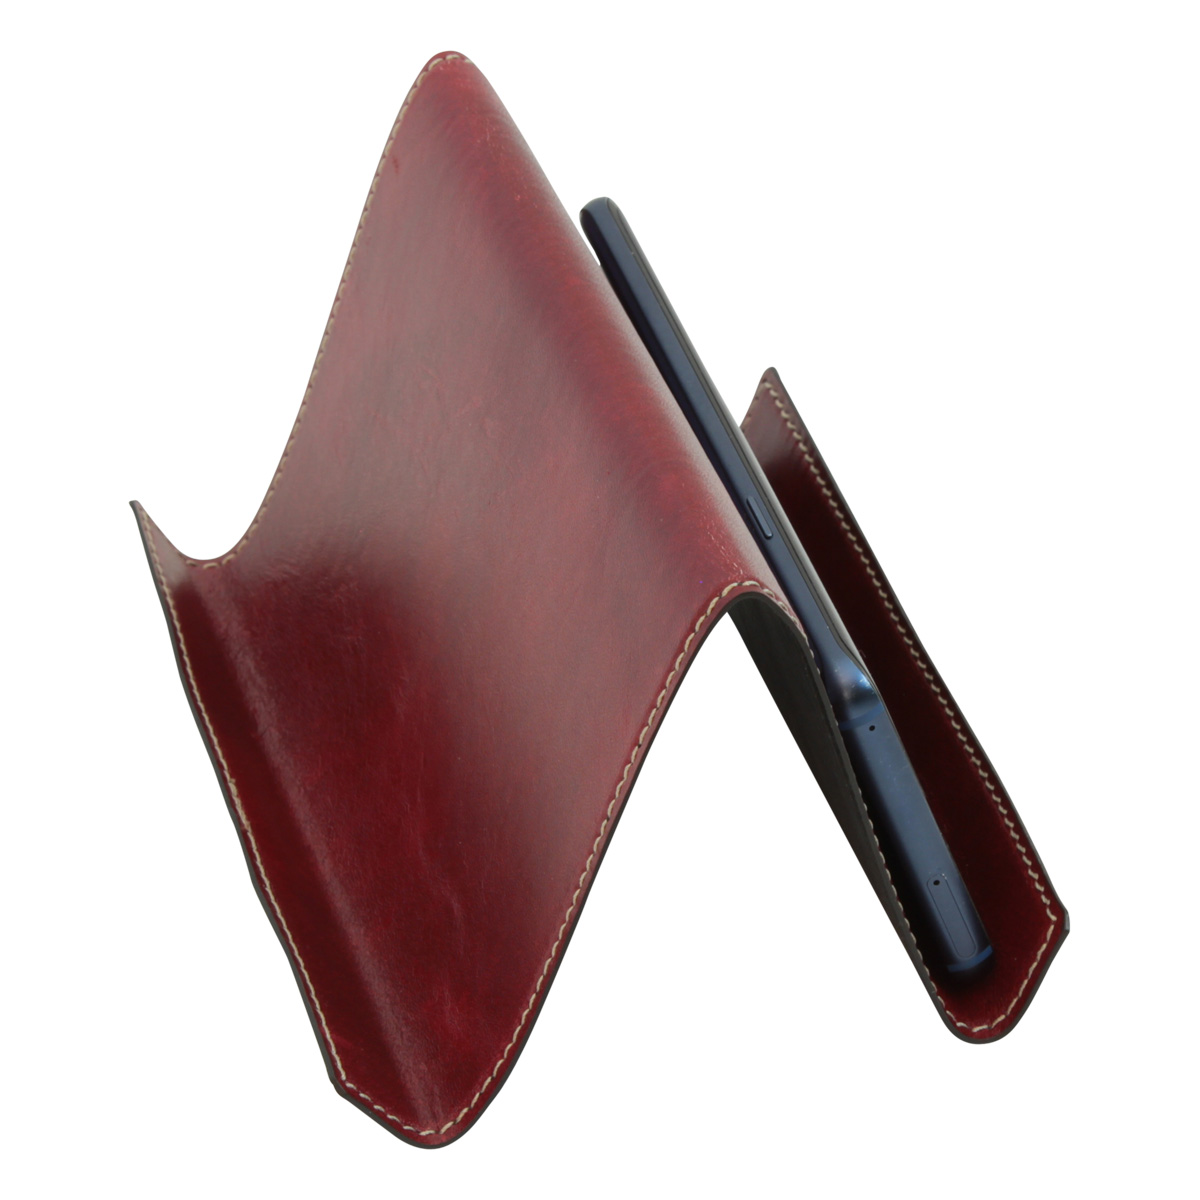 Leather ipad and iphone stand - red | 764089RO UK | Old Angler Firenze